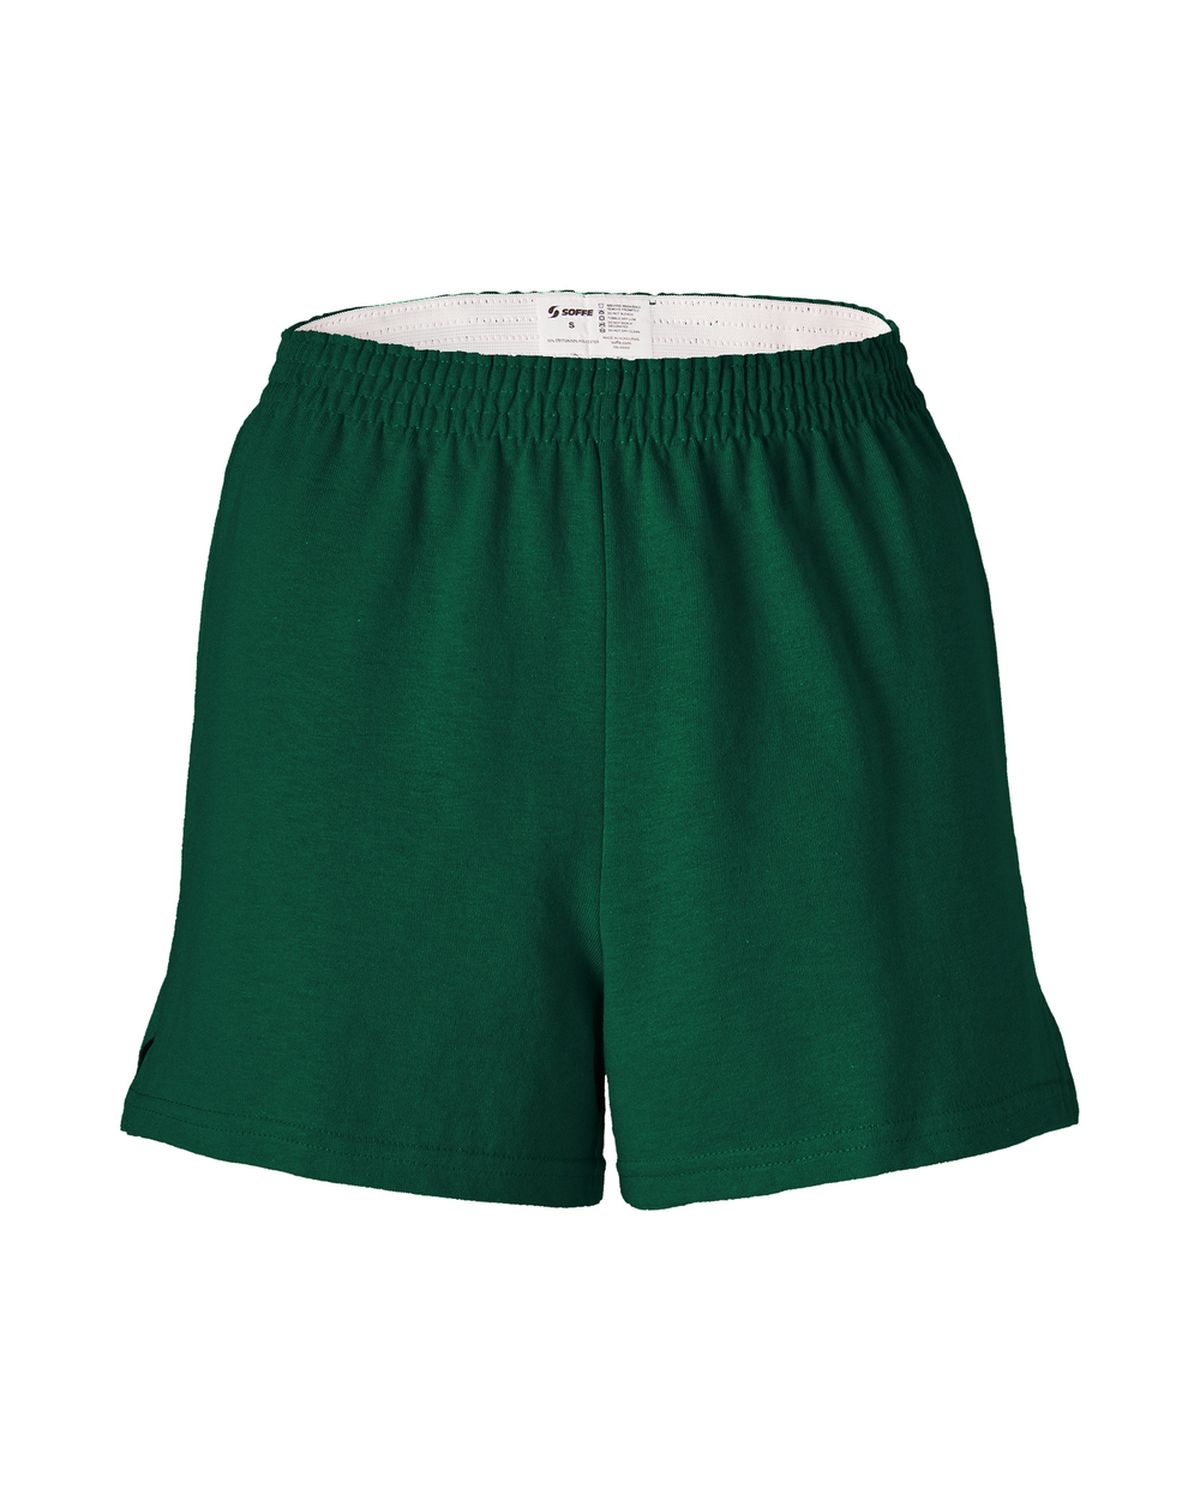 Girls Authentic Soffe Short, Soffe Apparel